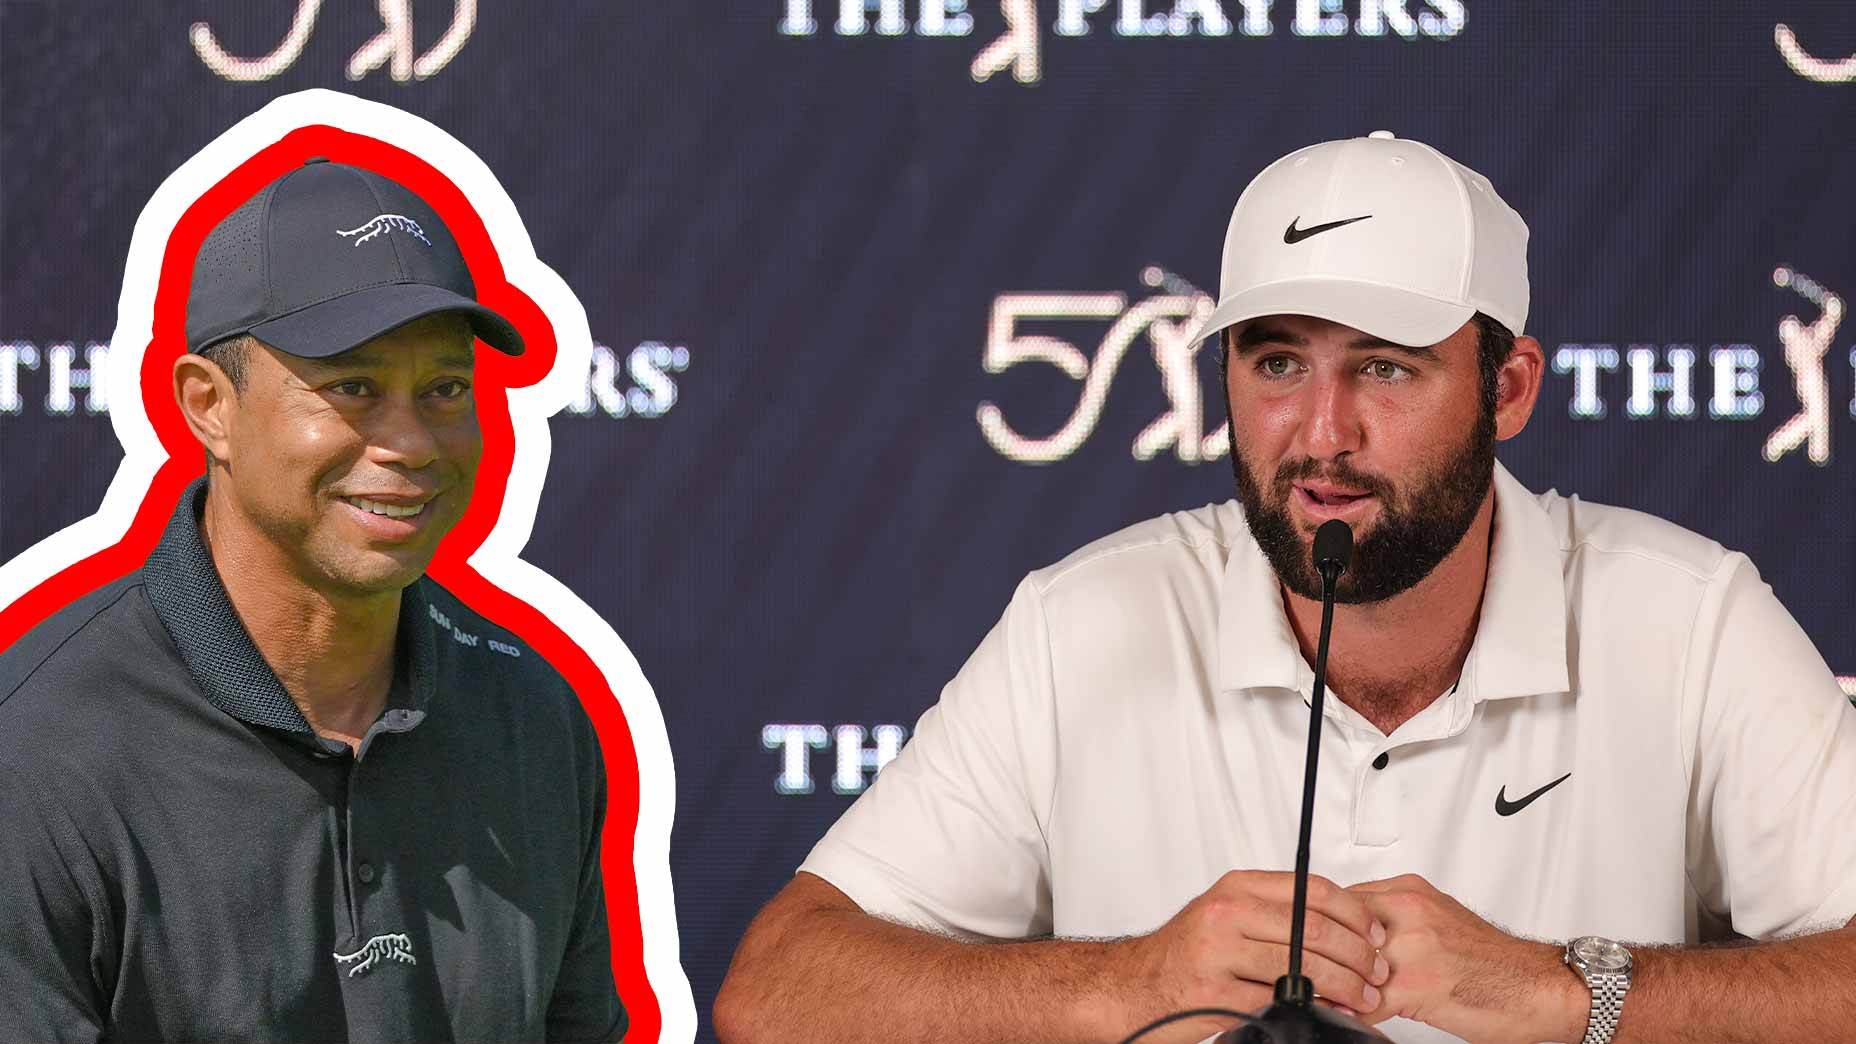 Scottie Scheffler's press conference with a super imposed image of Tiger Woods.